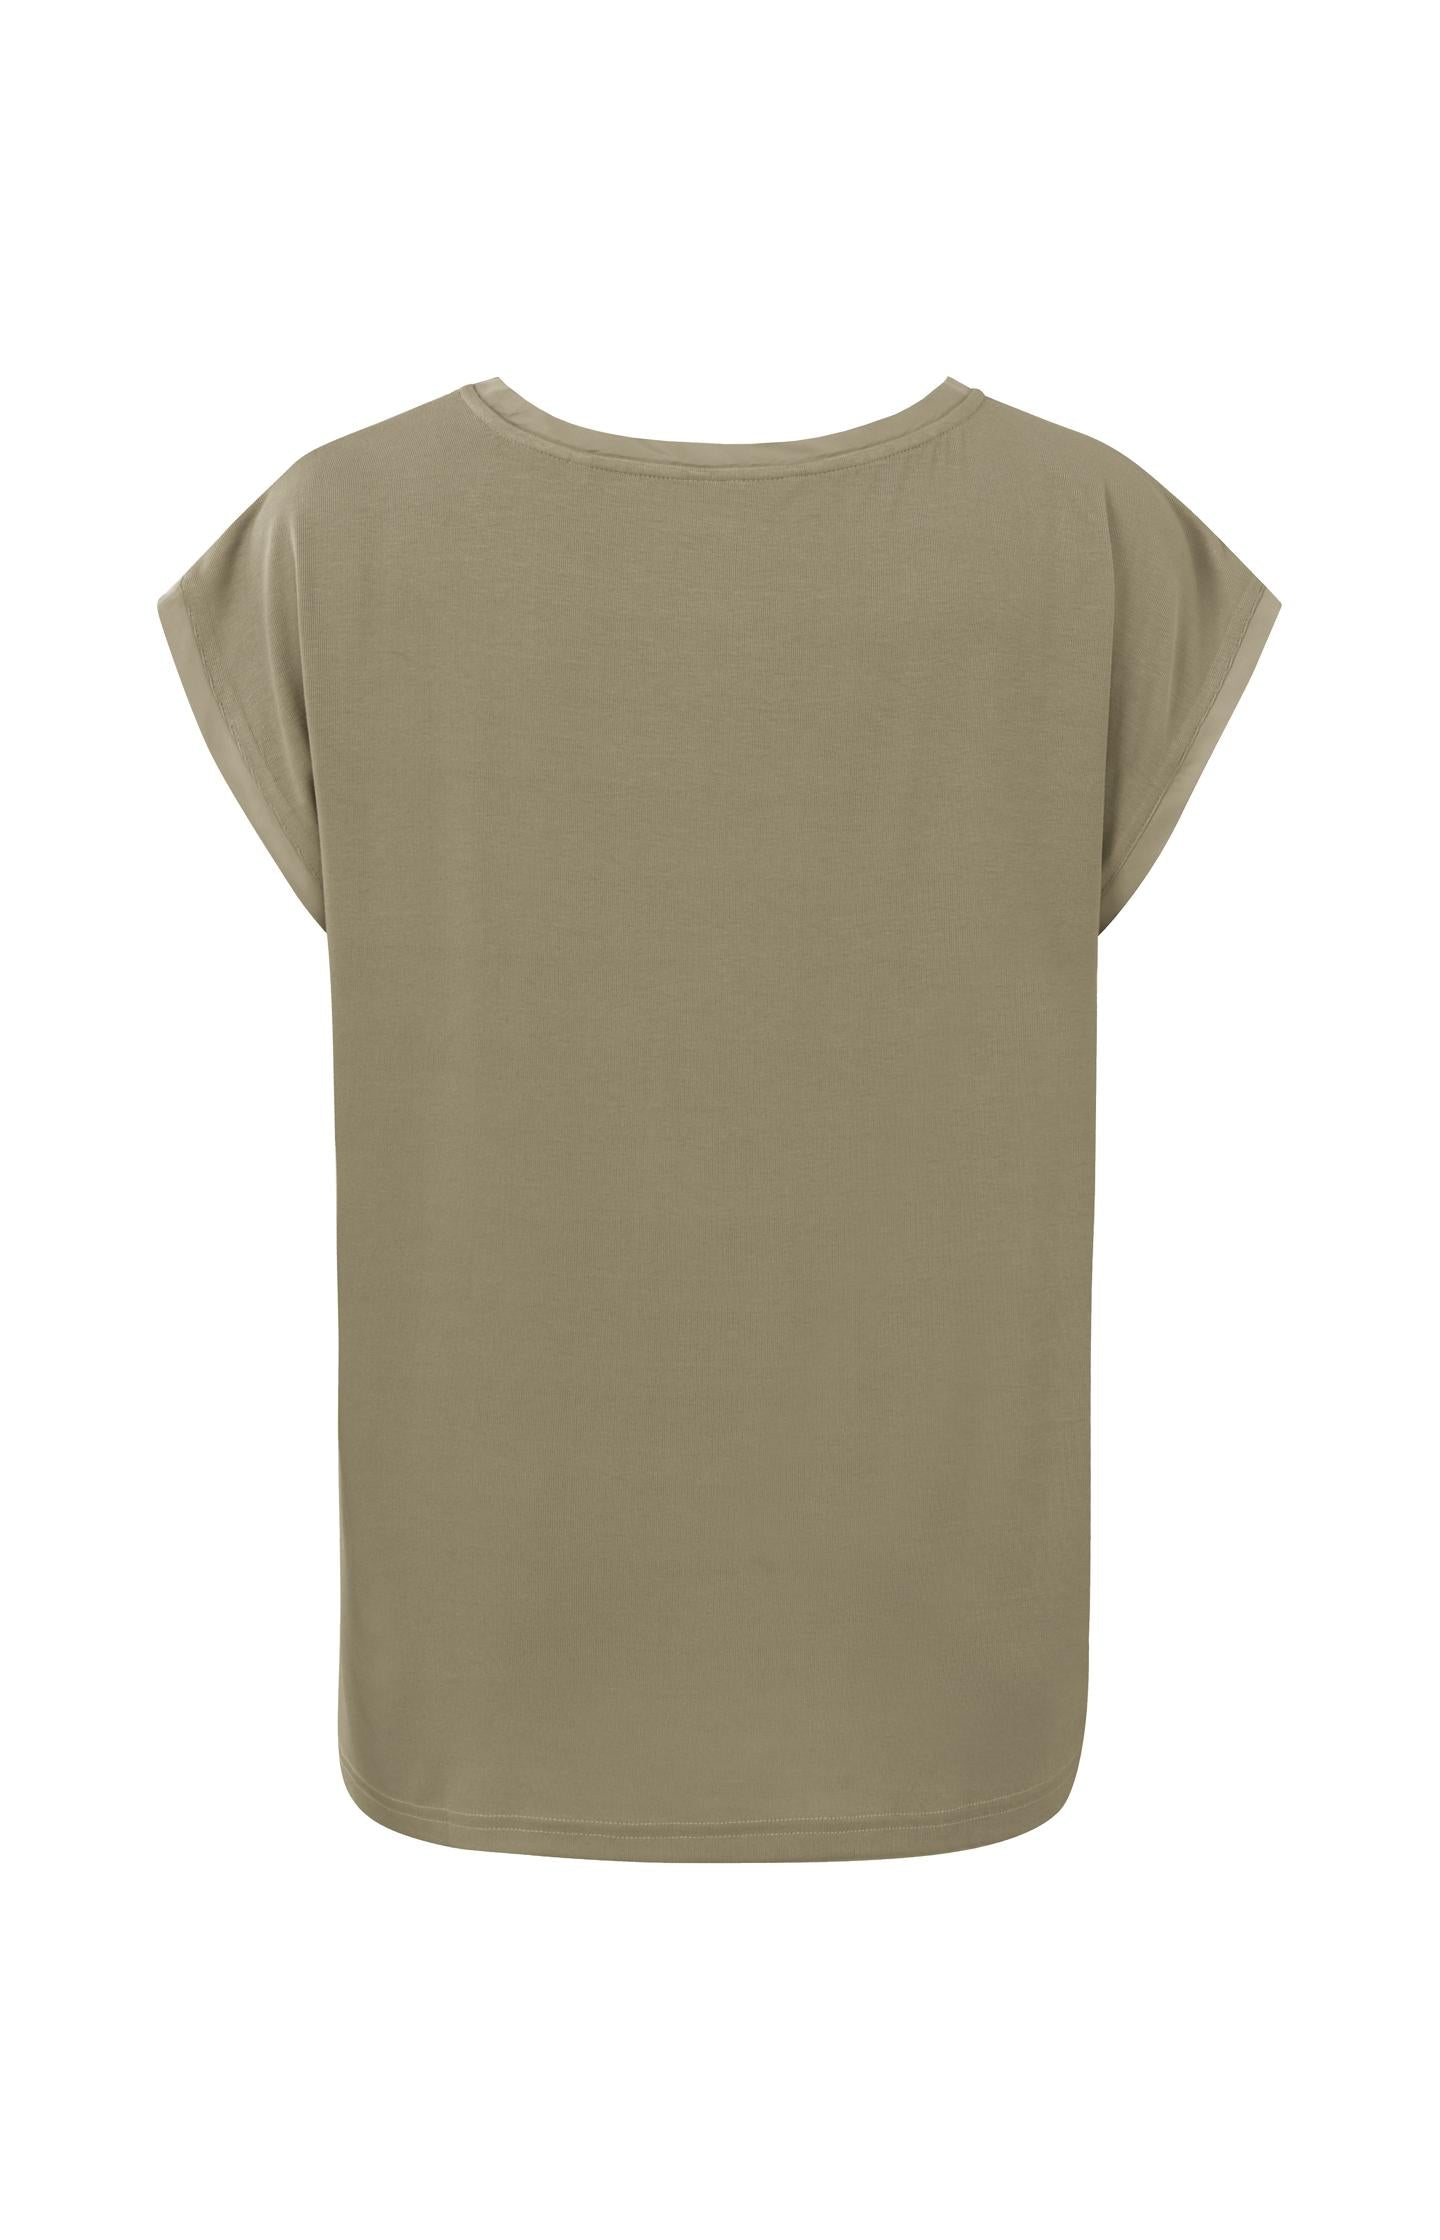 Top with round neck and cap sleeves without shoulder seams